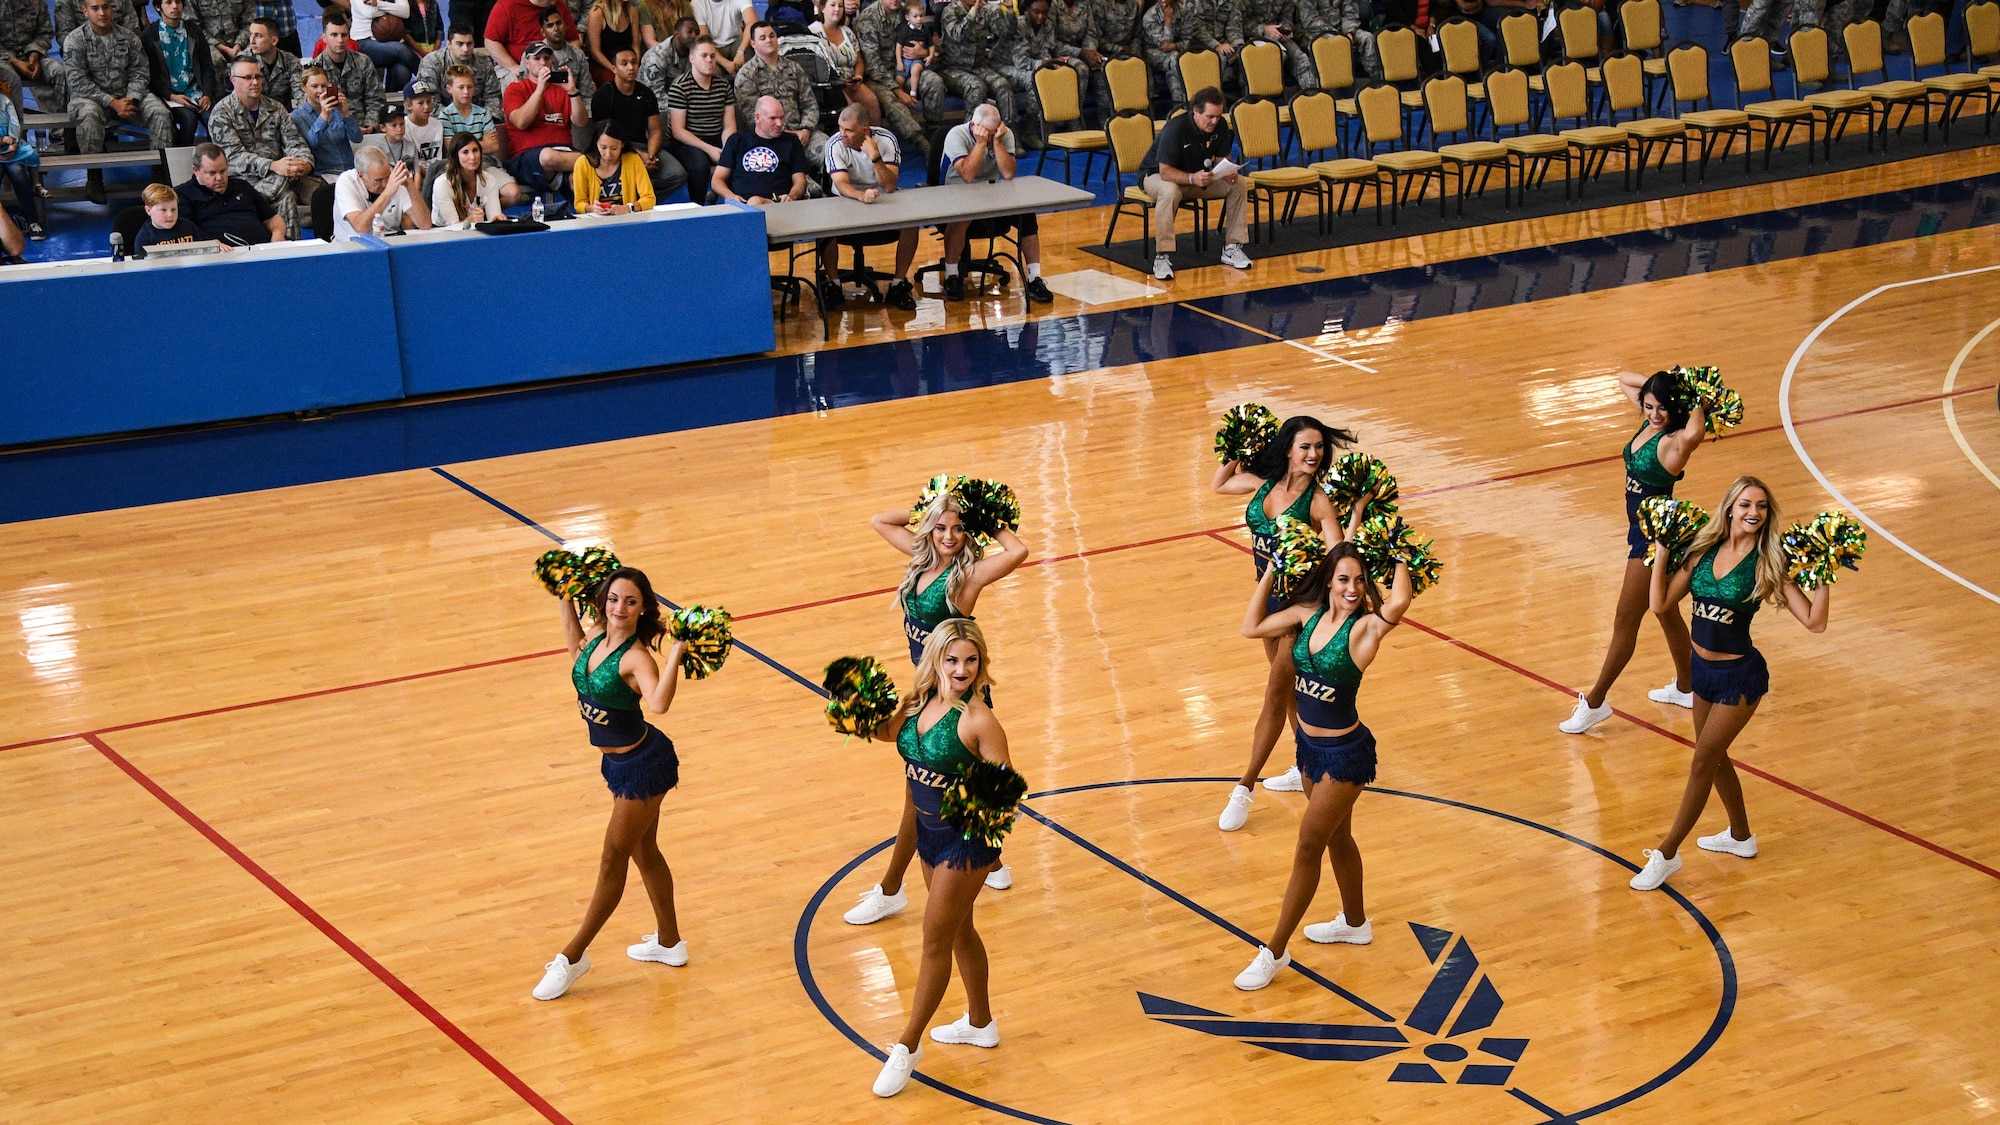 Utah Jazz players scrimmage at Warrior Fitness Center